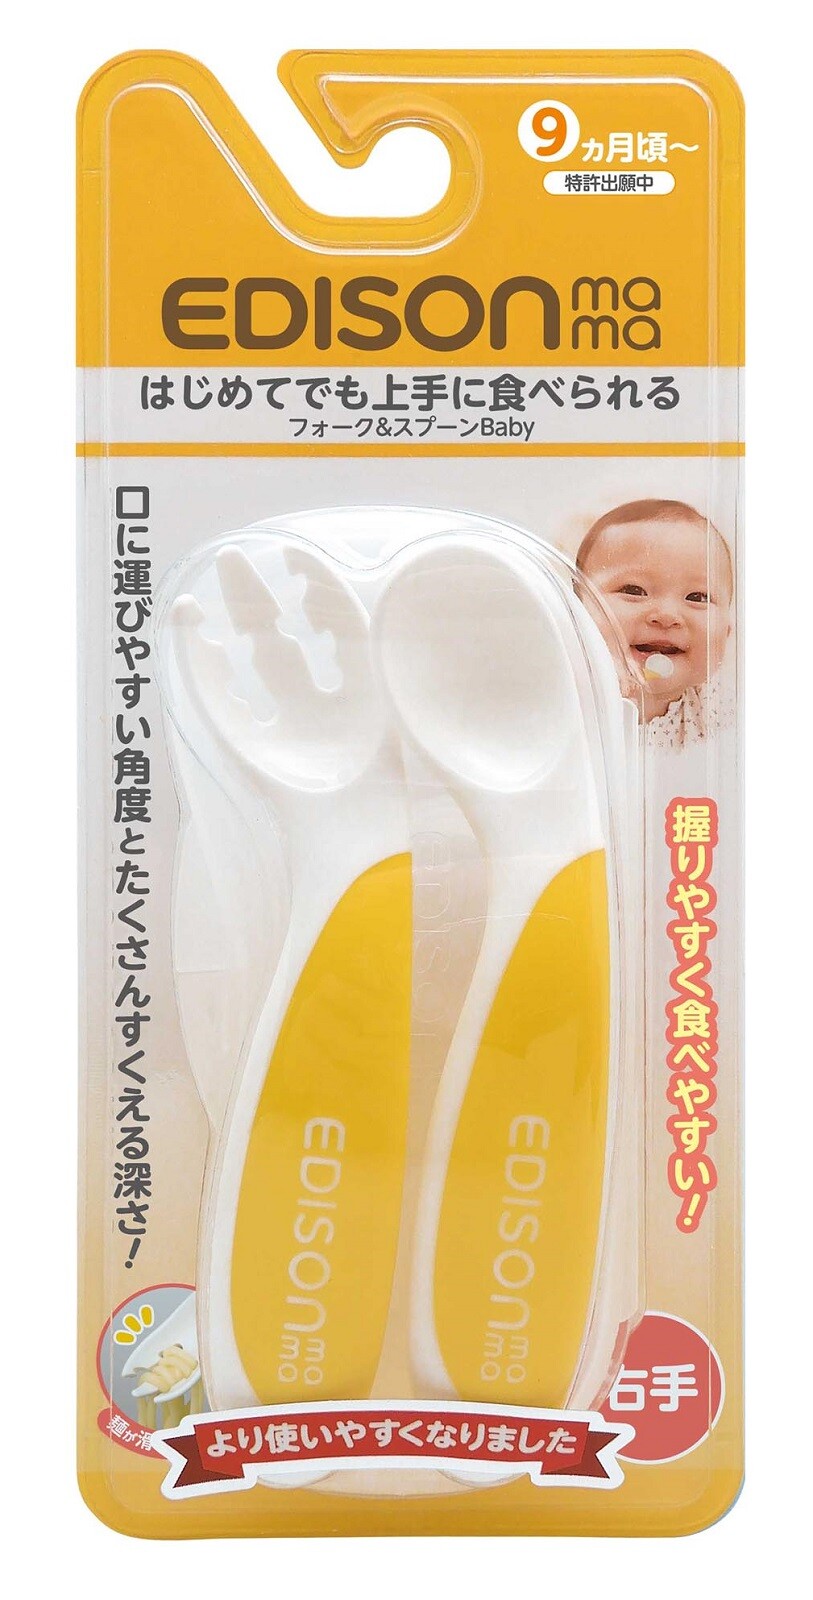 Believe Edison Fork Spoon Baby Lemon Right Hand Import Japanese Products At Wholesale Prices Super Delivery